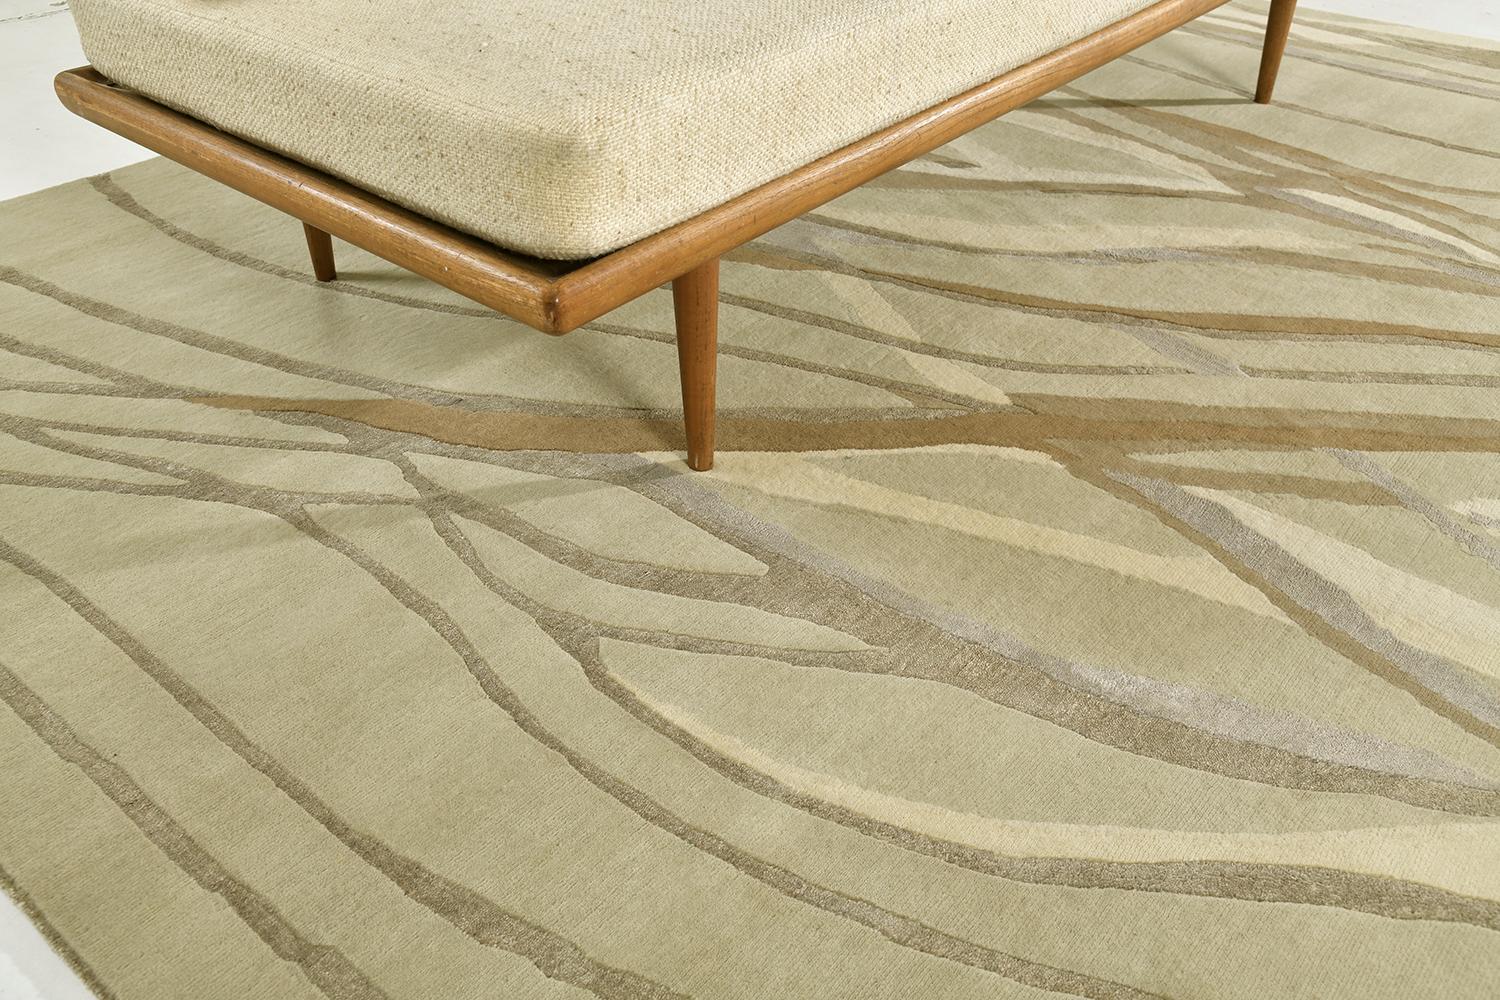 Sue returns to her roots in Malibu for inspiration in this collection. Each piece arises out of a sense of the colors and atmosphere unique to this enclave, from a time in history when the line separating earth and ocean was undefined. Each rug